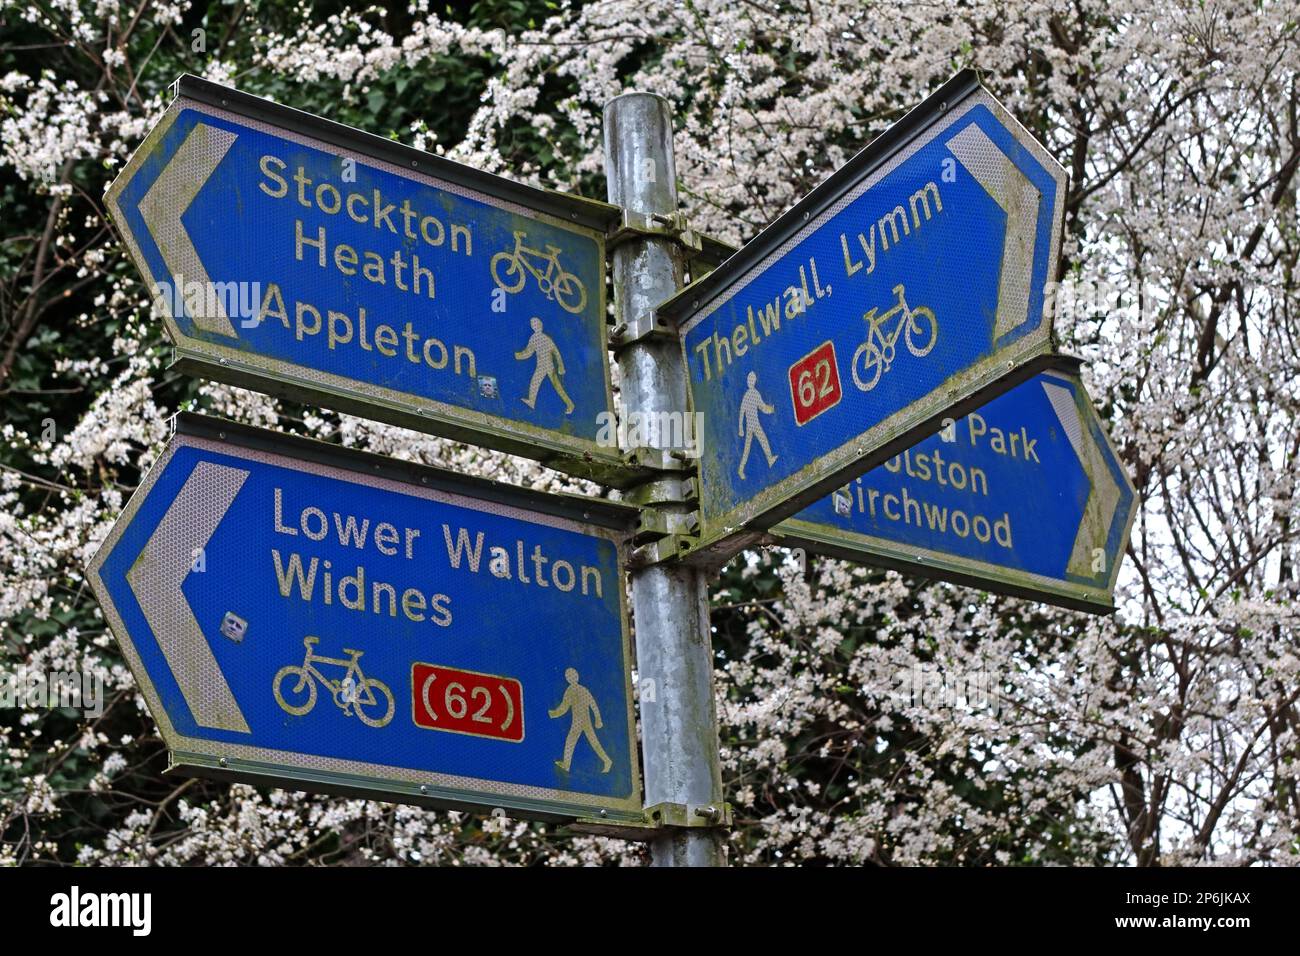 Walking, cycling,low carbon footprint exercise routes in signs, in and around Warrington.15 minute city to Stockton Heath,Appleton, Thelwall ,Lymm etc Stock Photo